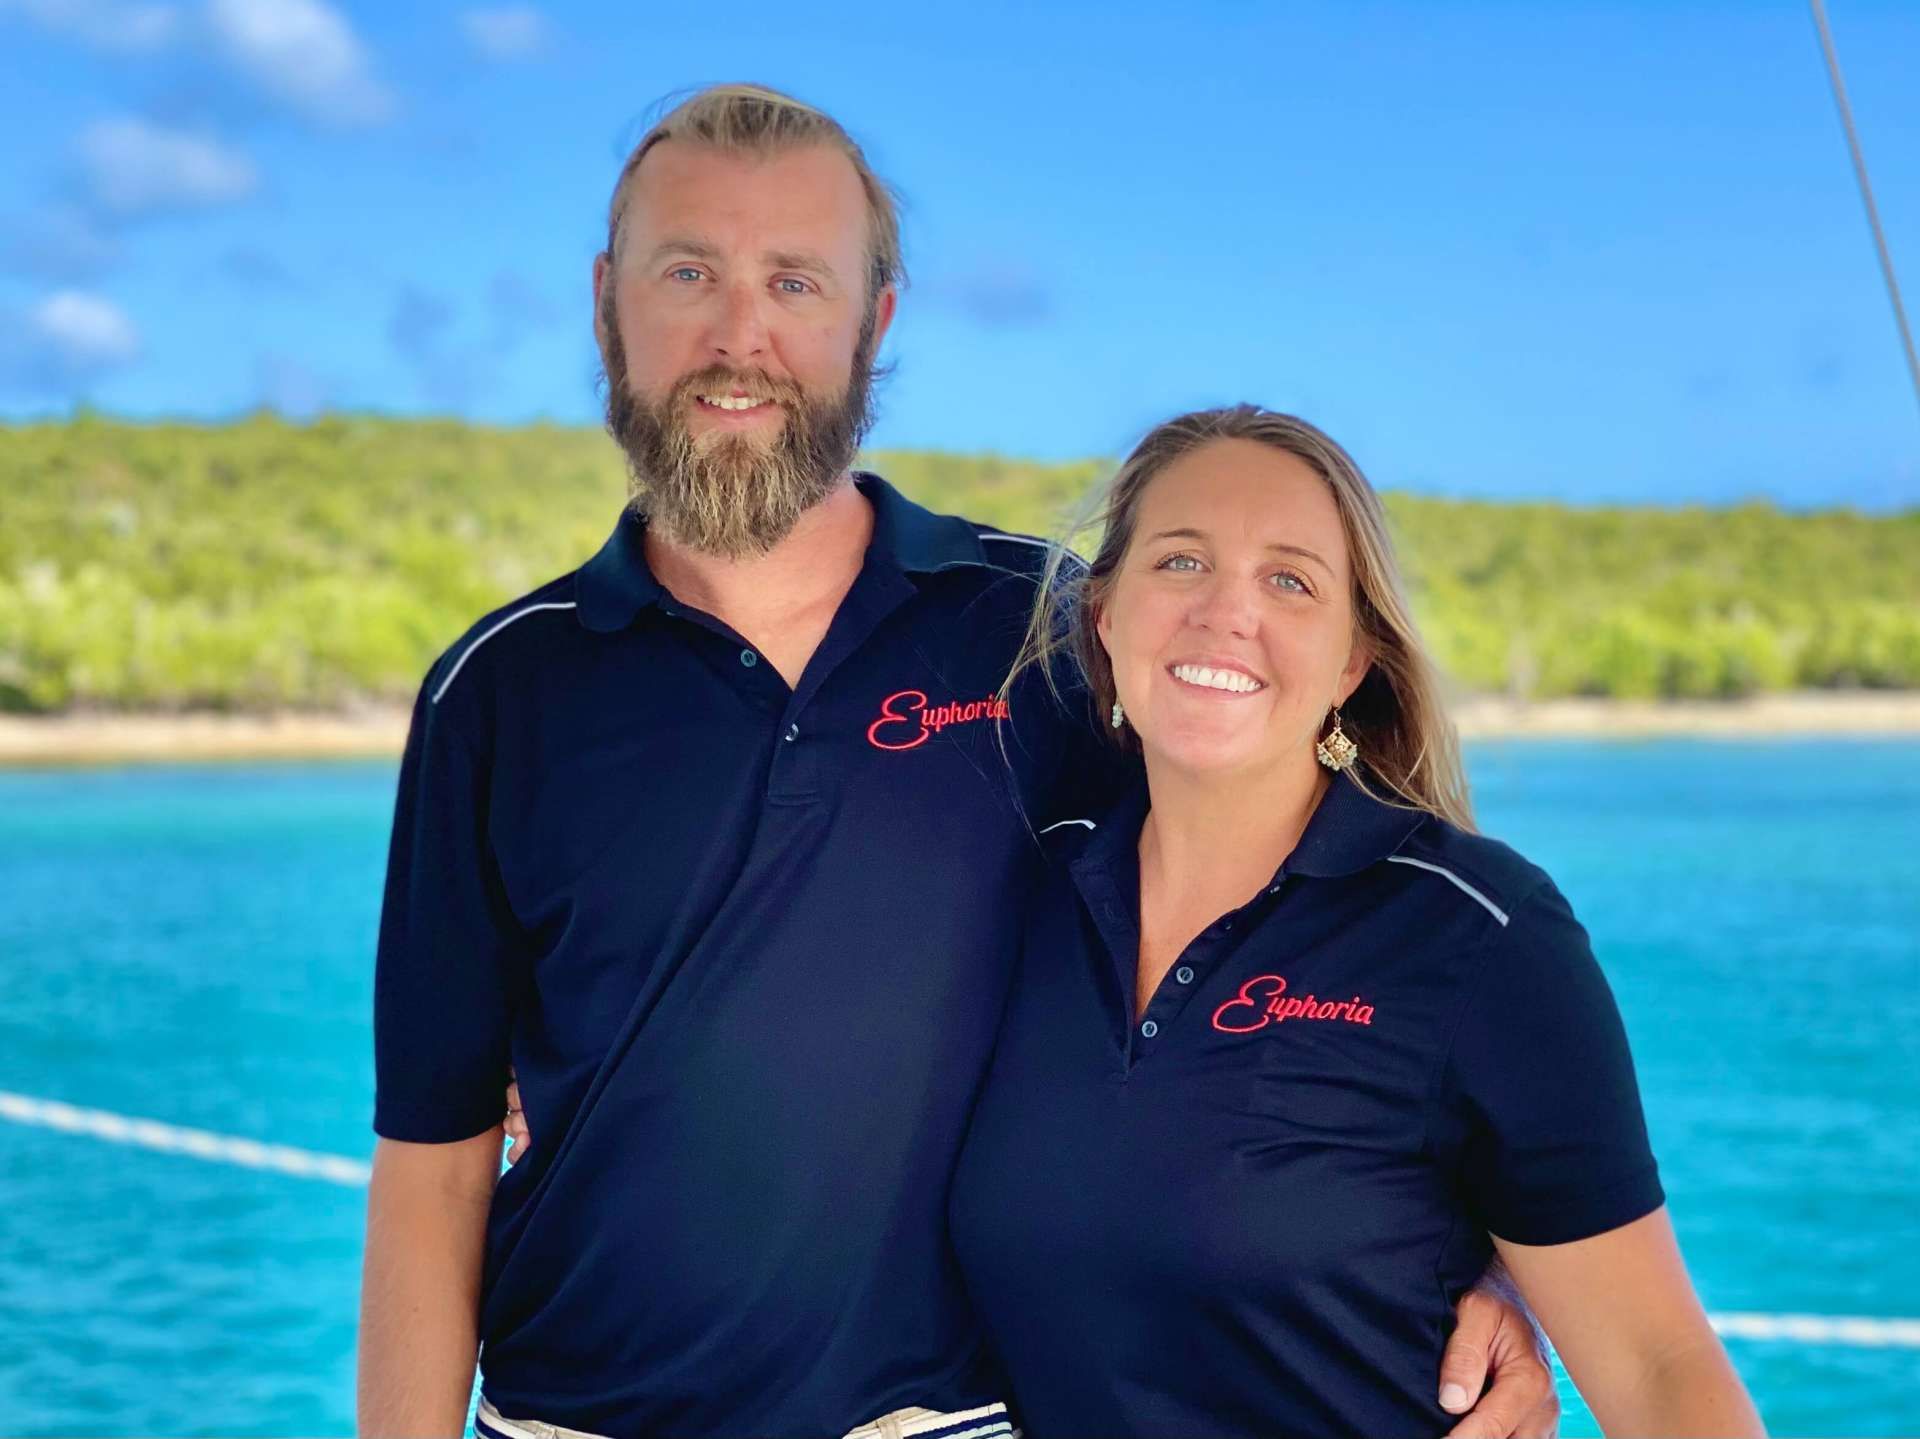 Cory and Emily both have a strong love for the water and anything fun in the sun. Together they make a magnificent team and will go above and beyond to make your vacation memories last a lifetime.<br /><br />Cory's passion for water sports started at